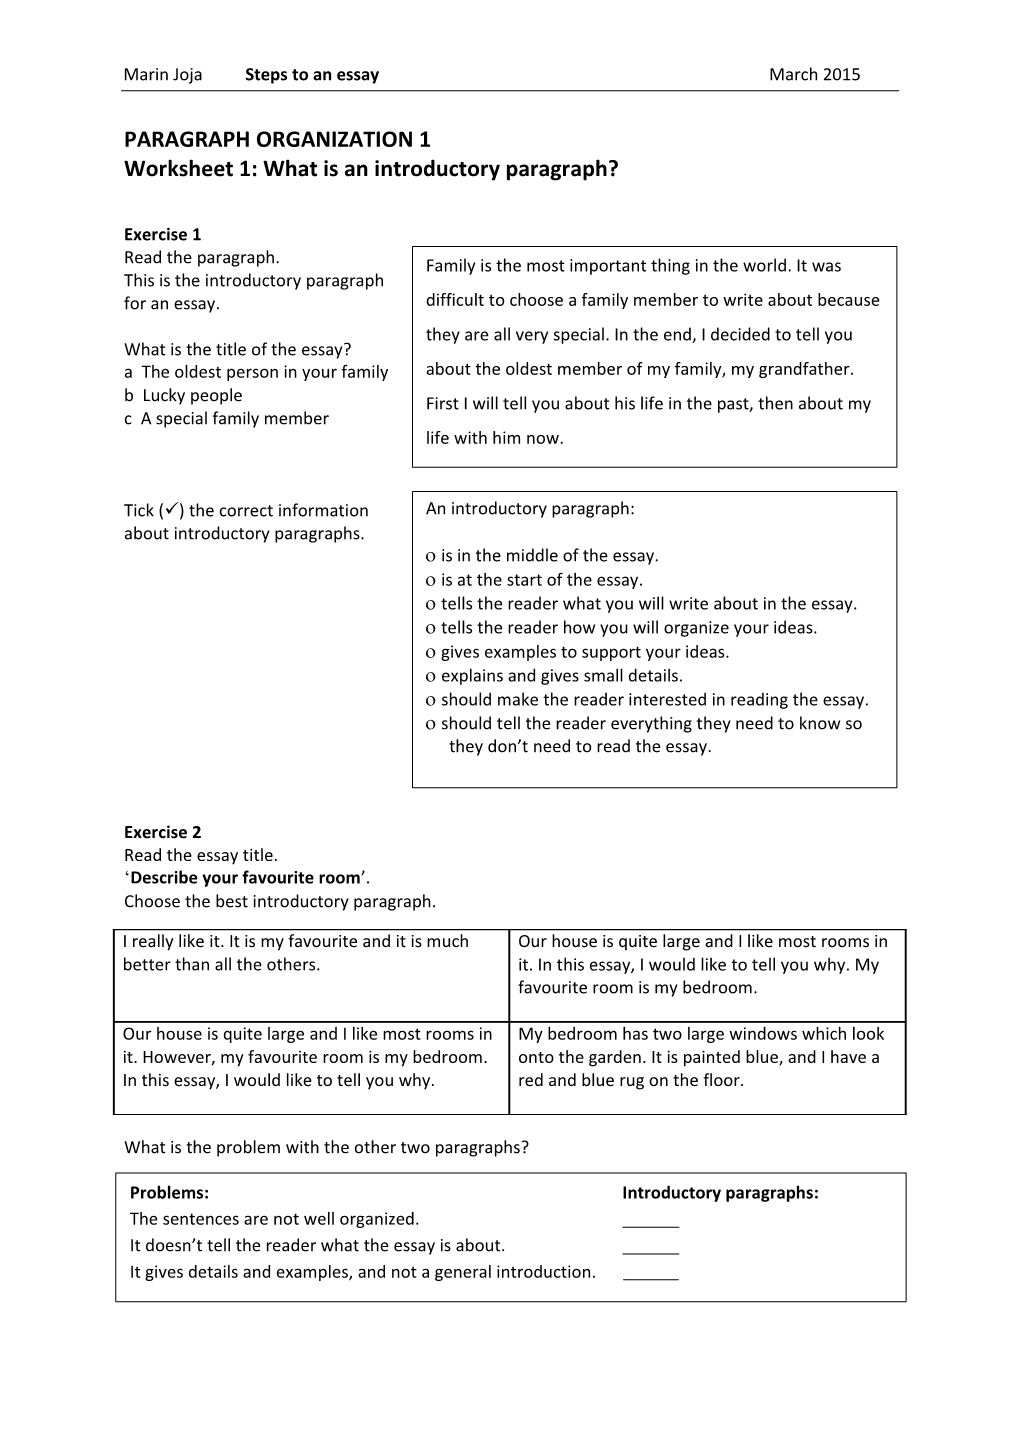 Worksheet 1: What Is an Introductory Paragraph?